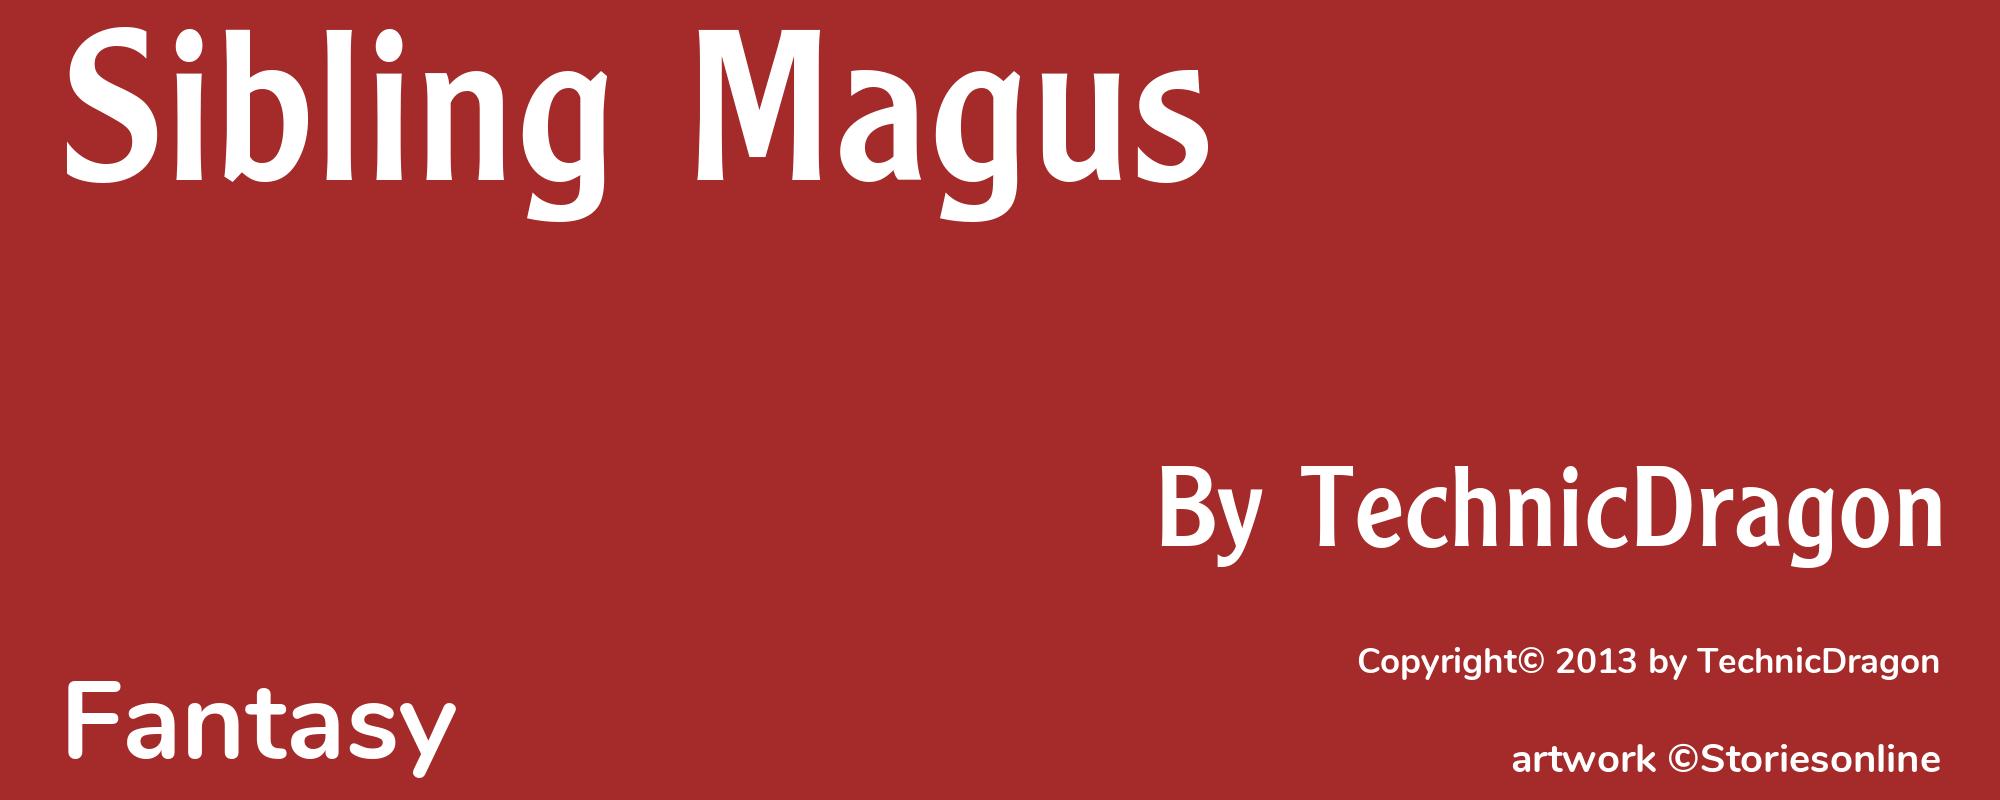 Sibling Magus - Cover